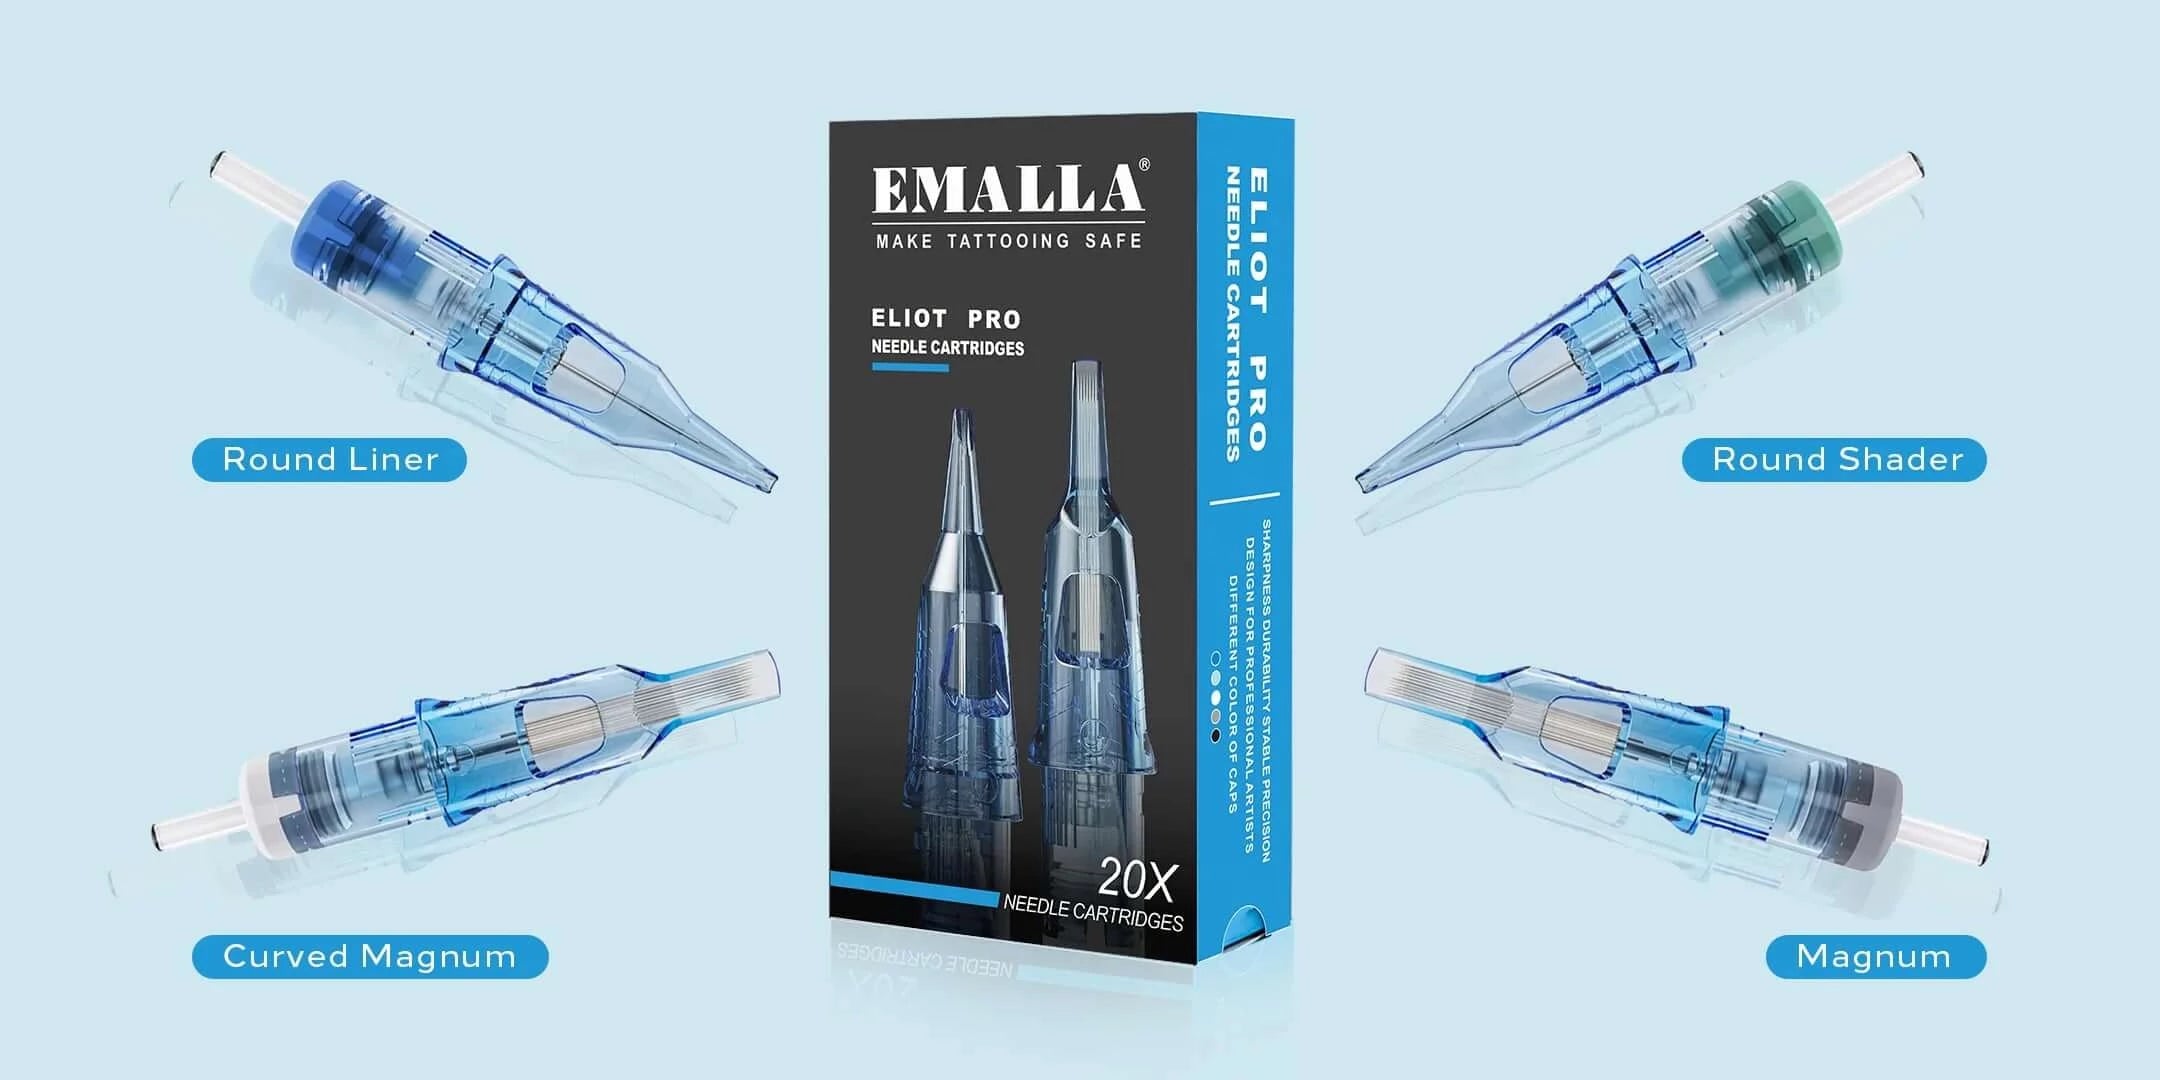 EMALLA ELIOT PRO Tattoo Cartridge Needles with four color plugs for different sizes